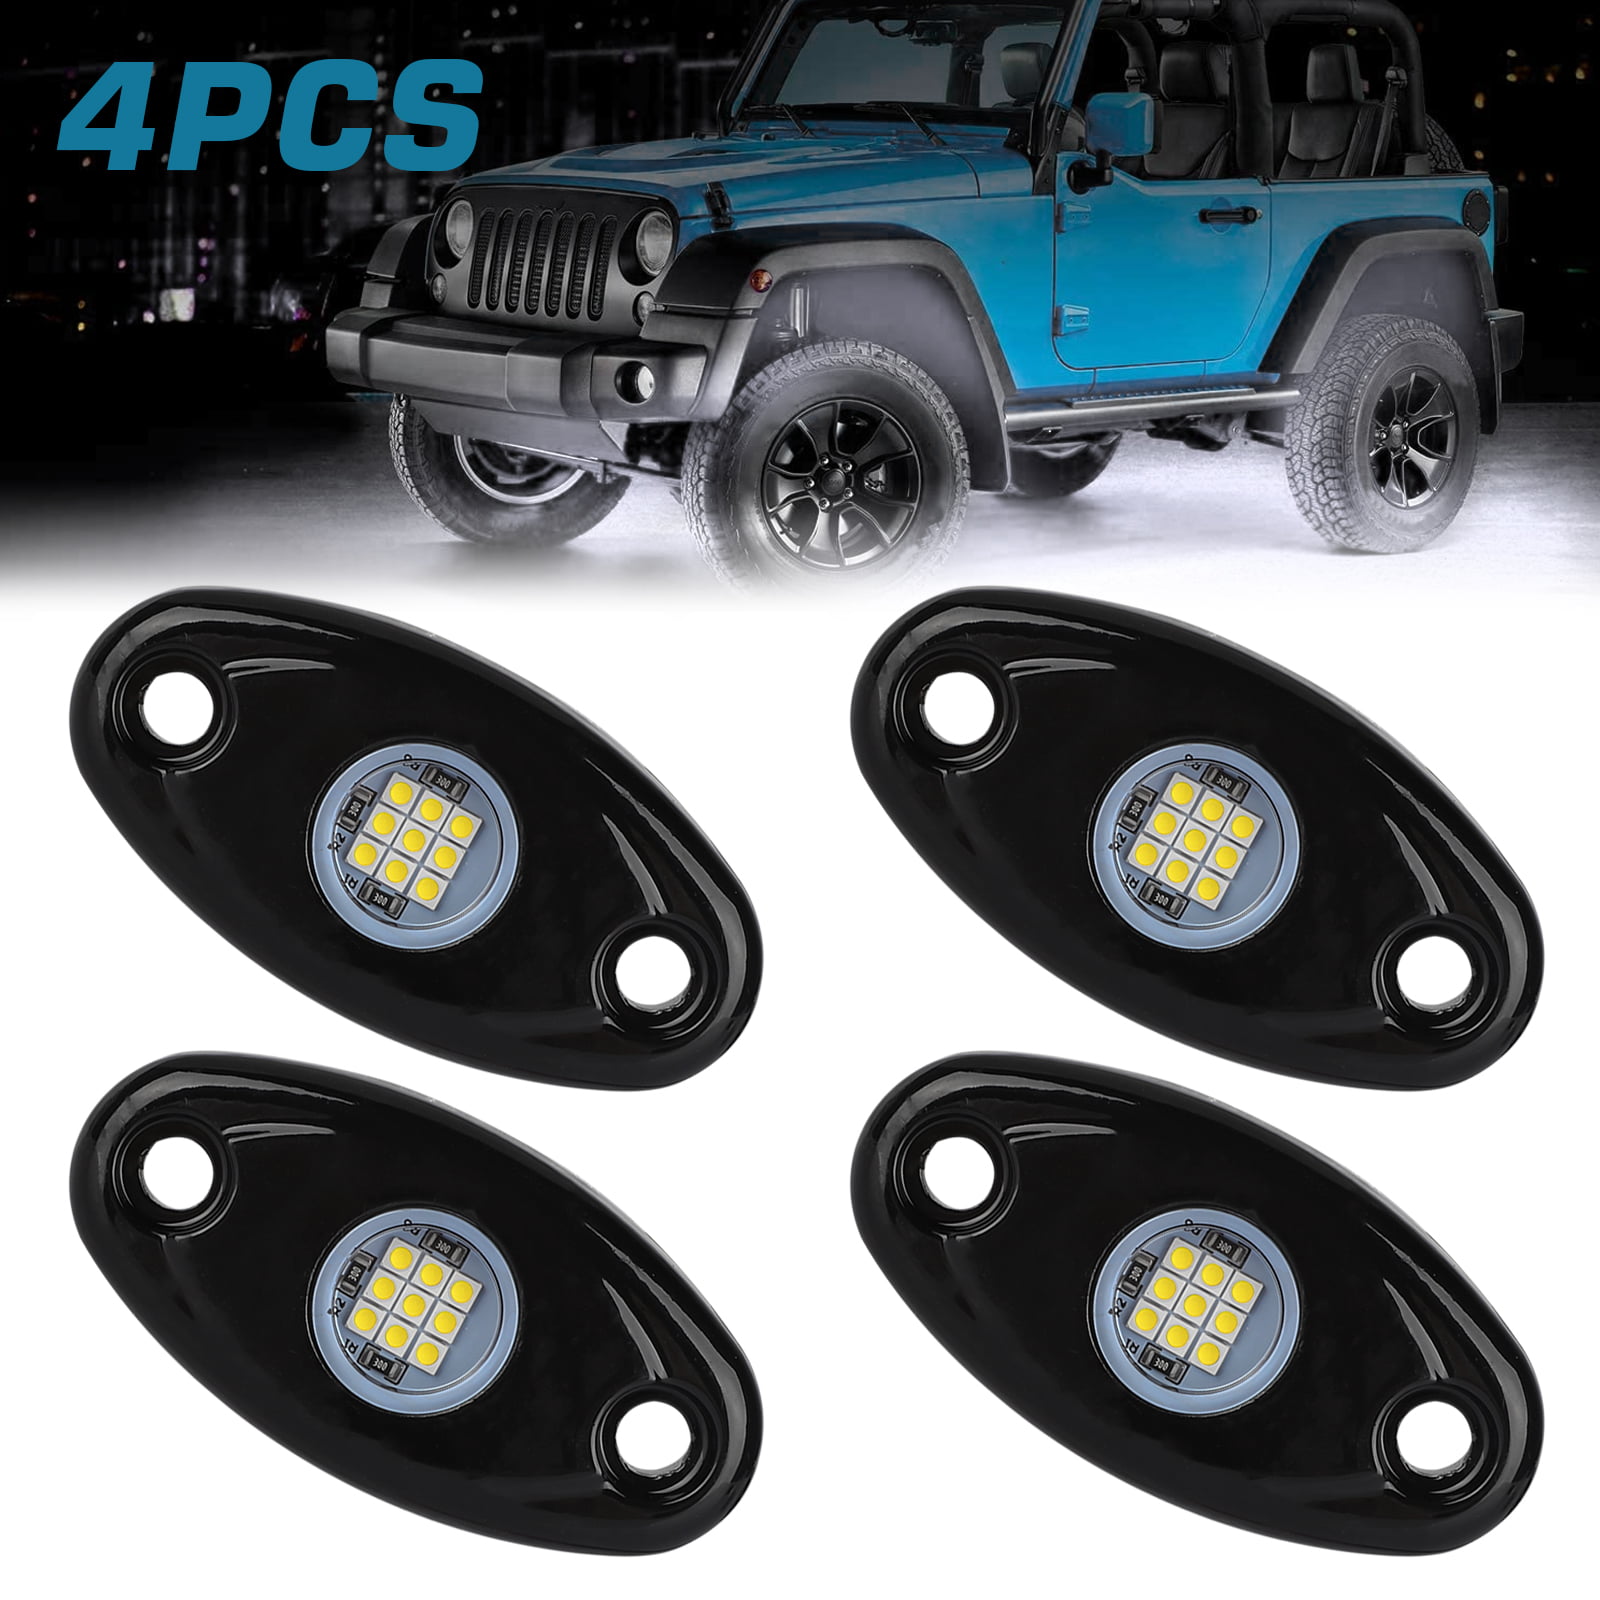 Waterproof Underglow Underbody Light Kit with Wiring Harness for Car Truck ATV UTV SUV Jeep Offroad Boat MICTUNING 4 Pods White LED Rock Lights 